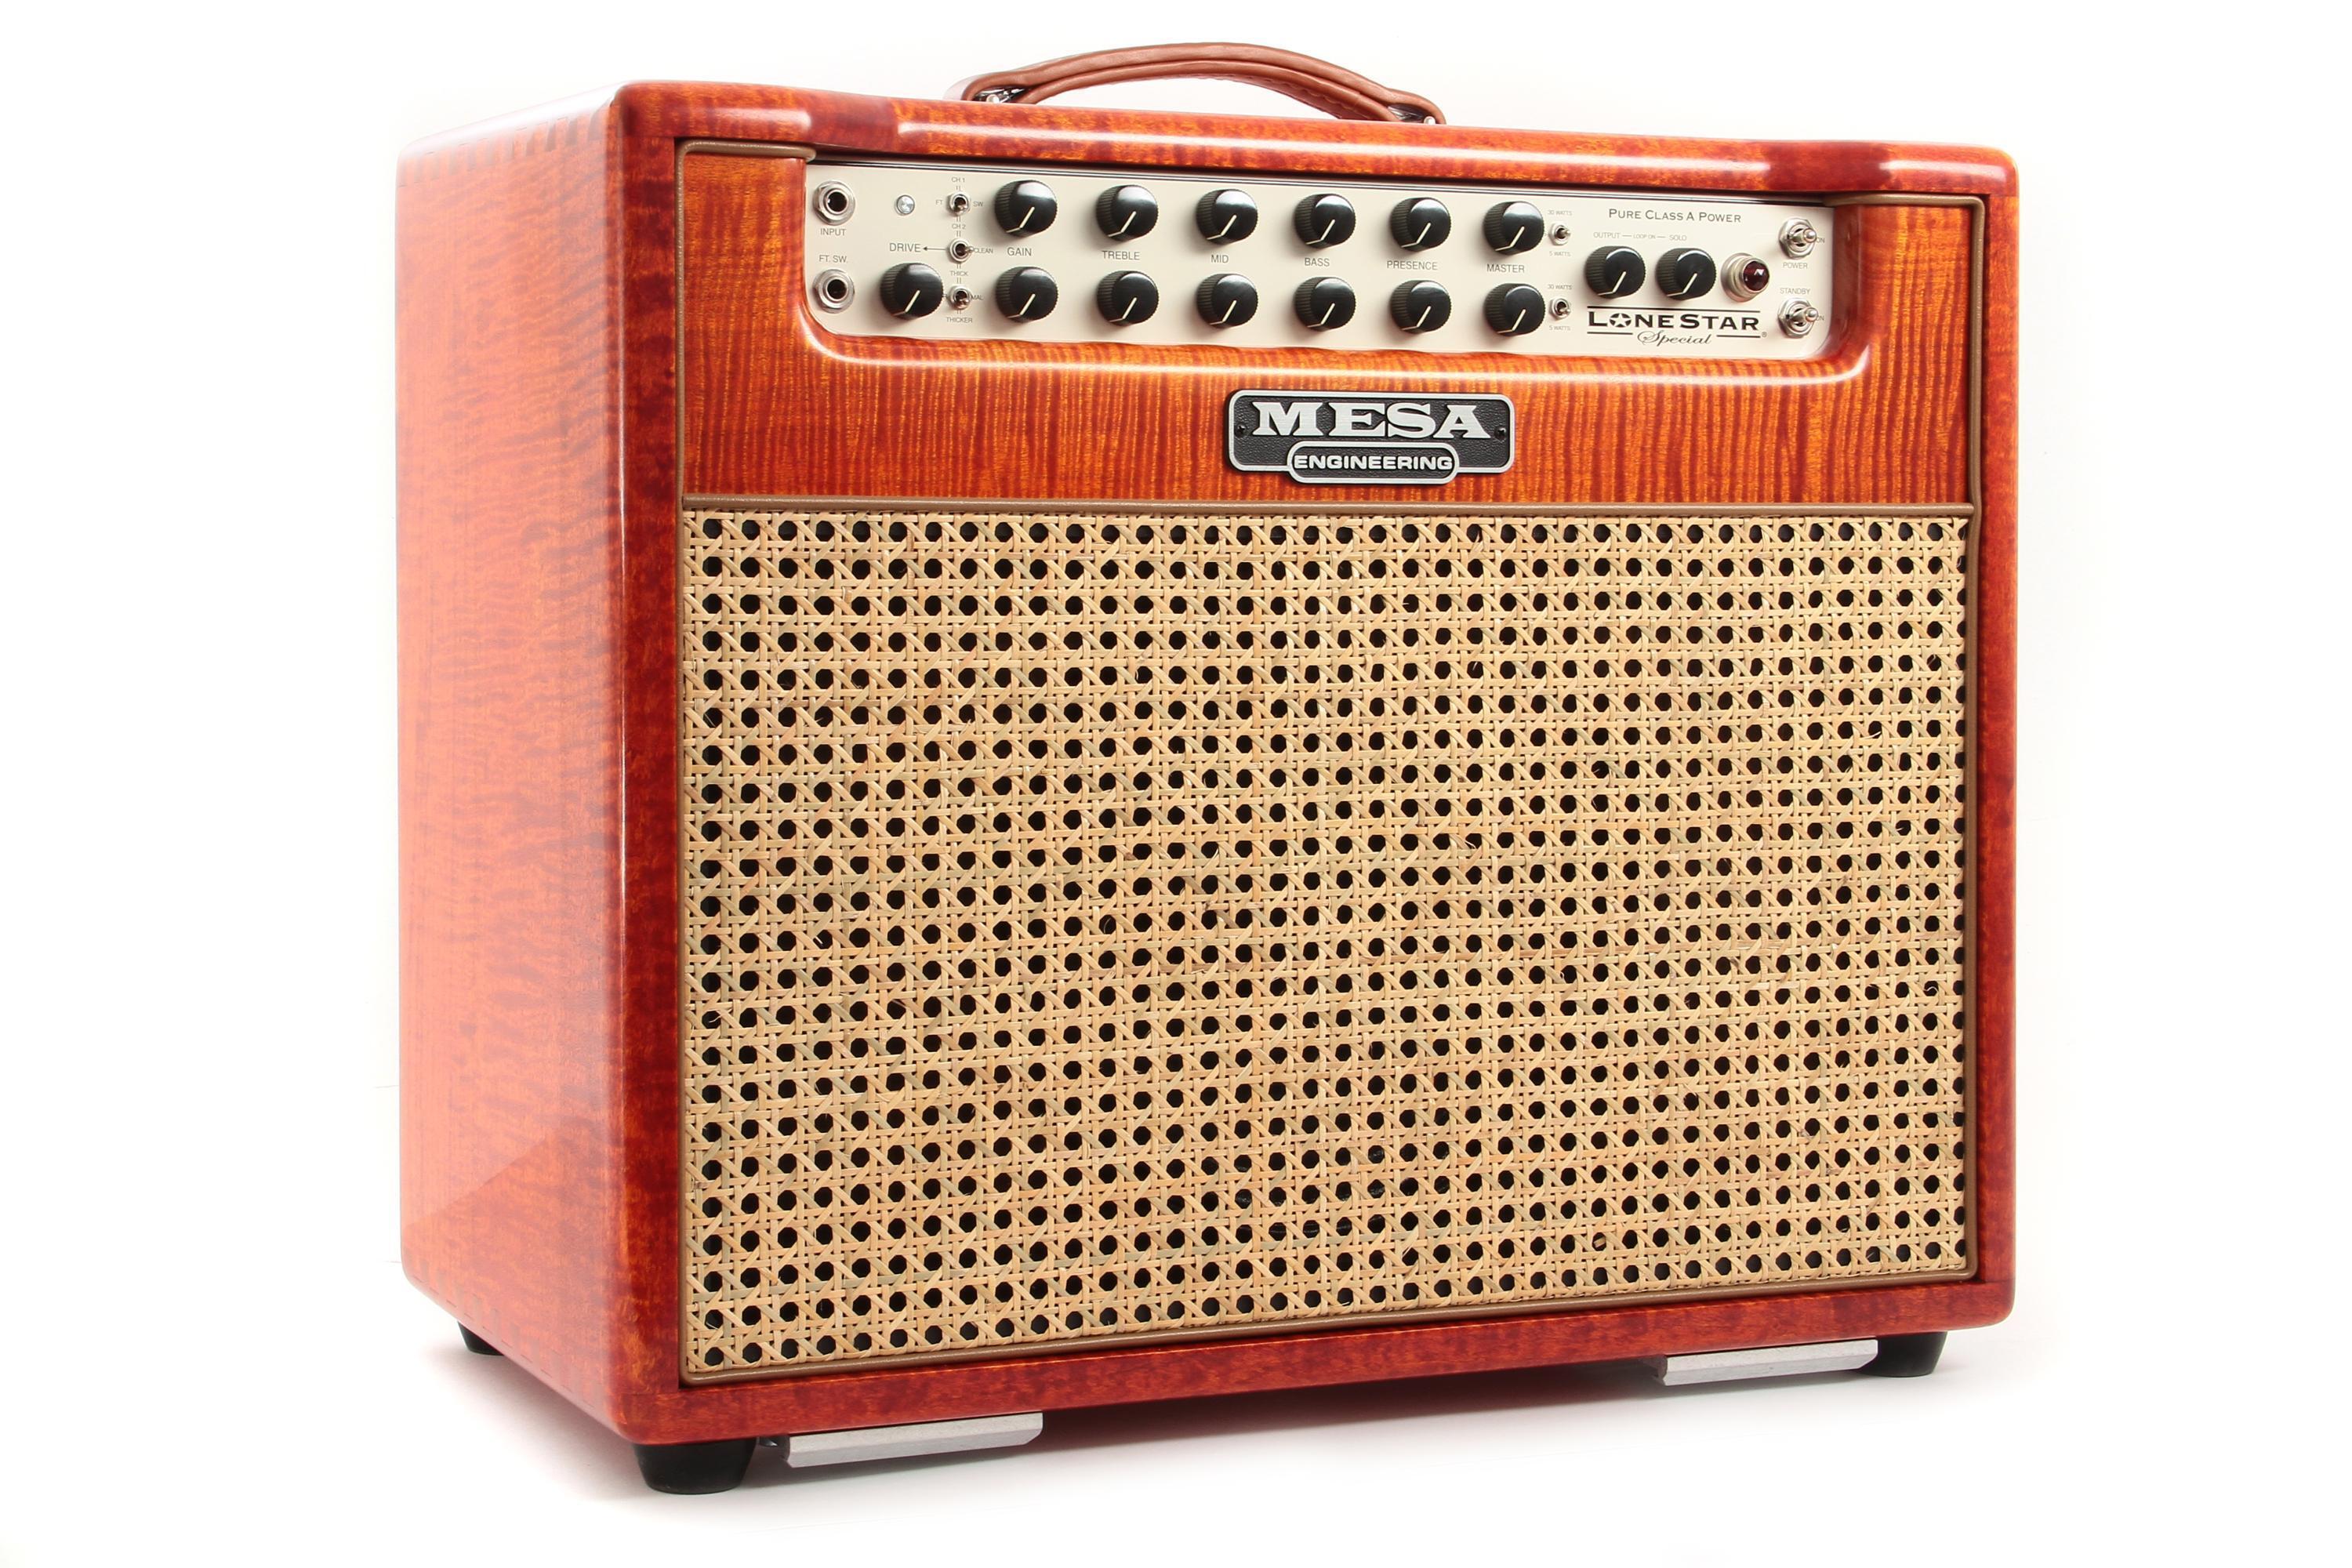 Mesa/Boogie Lone Star Special 1x12 Private Reserve Combo - Flame Maple  Orange Wicker Grill